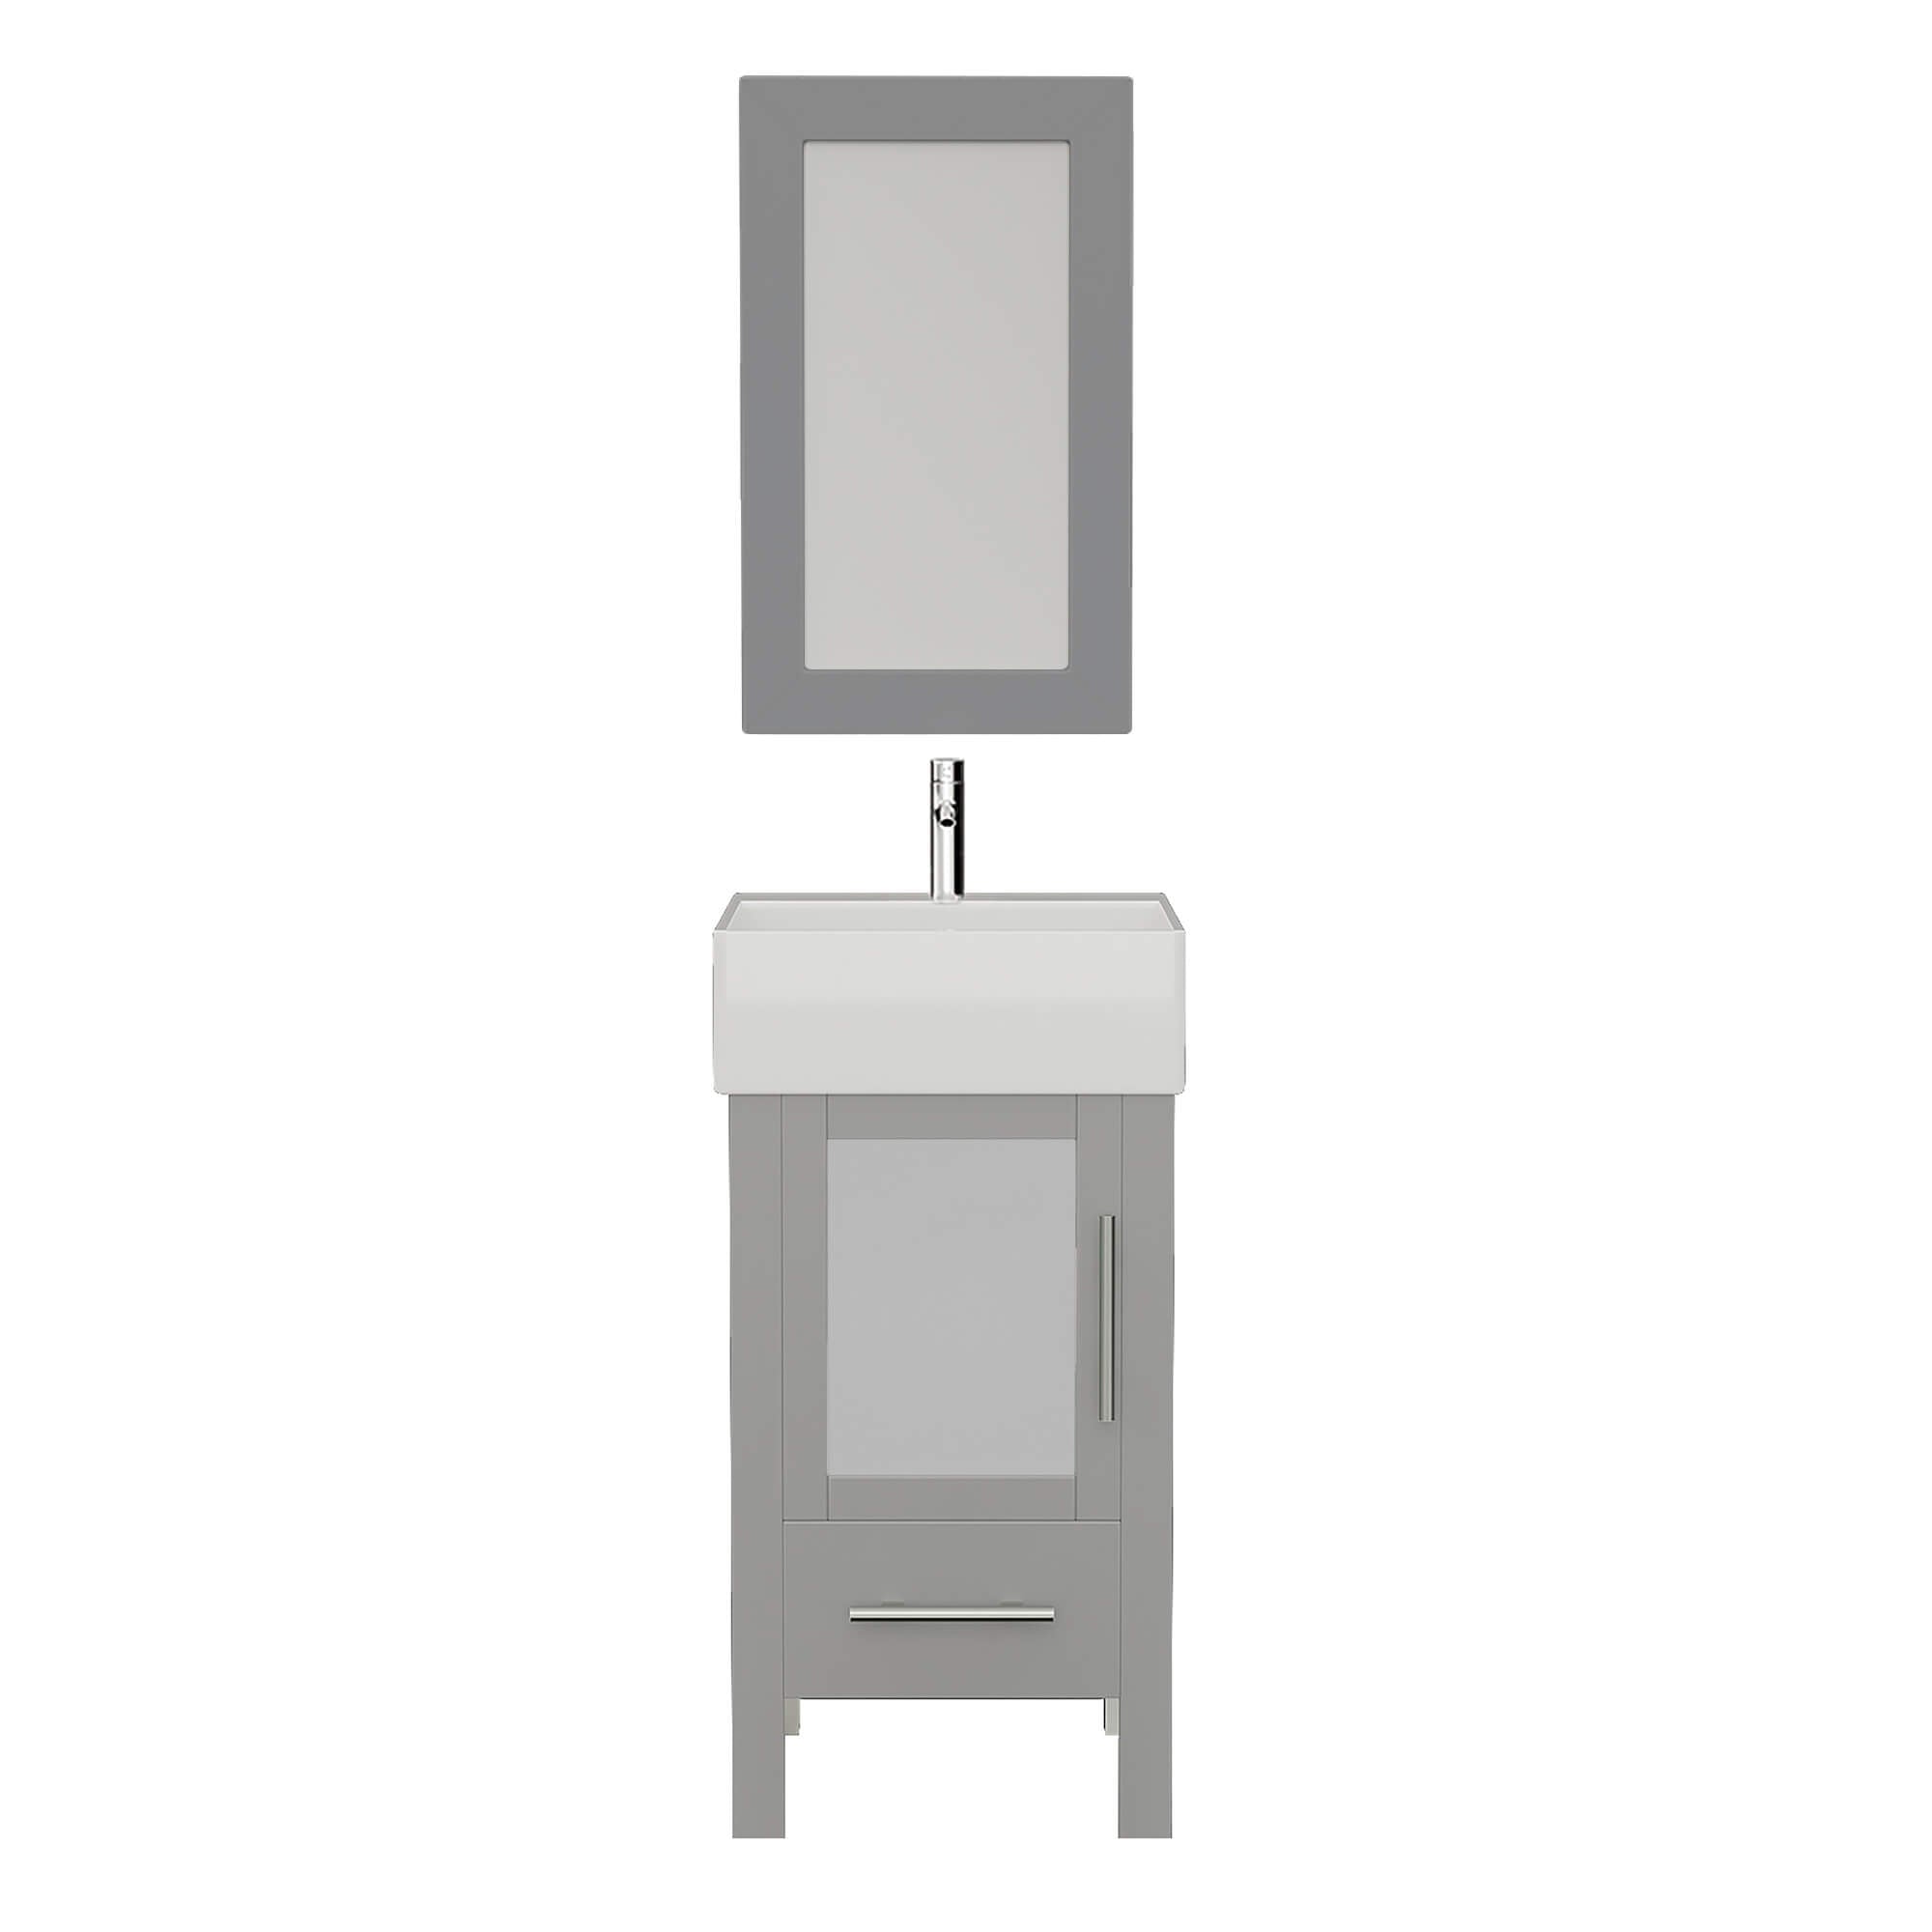 Cambridge Plumbing 8137G 18" Single Bathroom Vanity in Gray with White Porcelain Top and Vessel Sink, Matching Mirror, Front View with Chrome Faucet